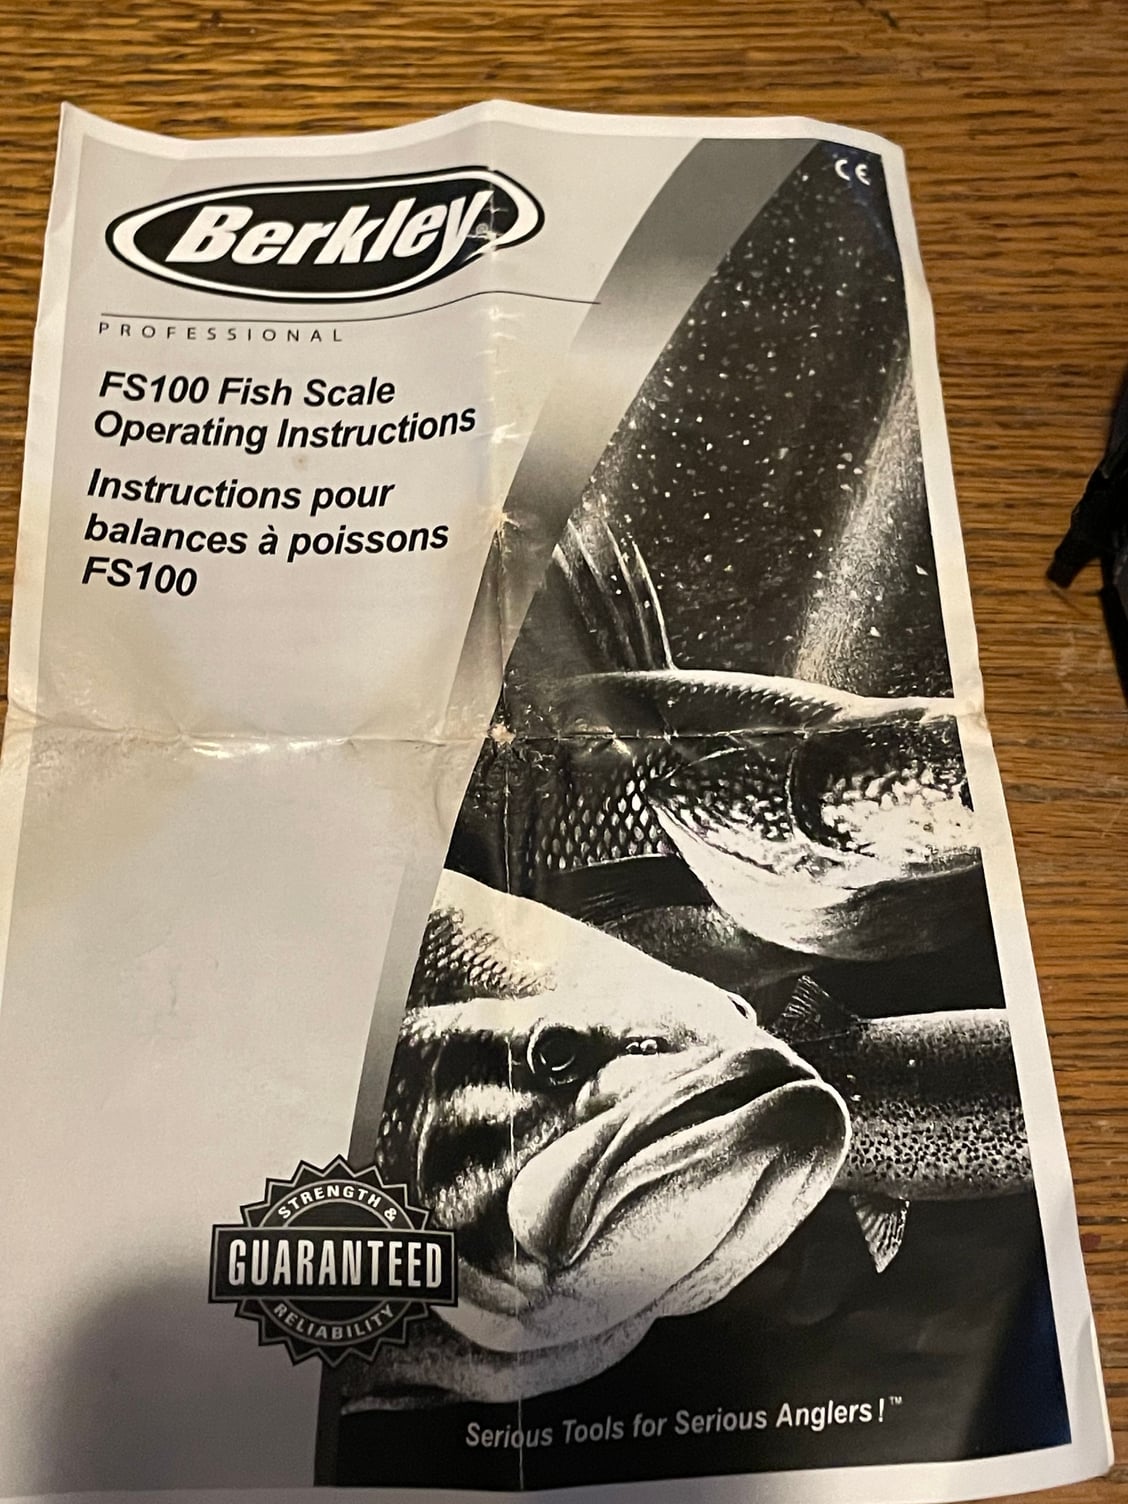 Berkley FS100 Fish Scale - 100lb - used - The Hull Truth - Boating